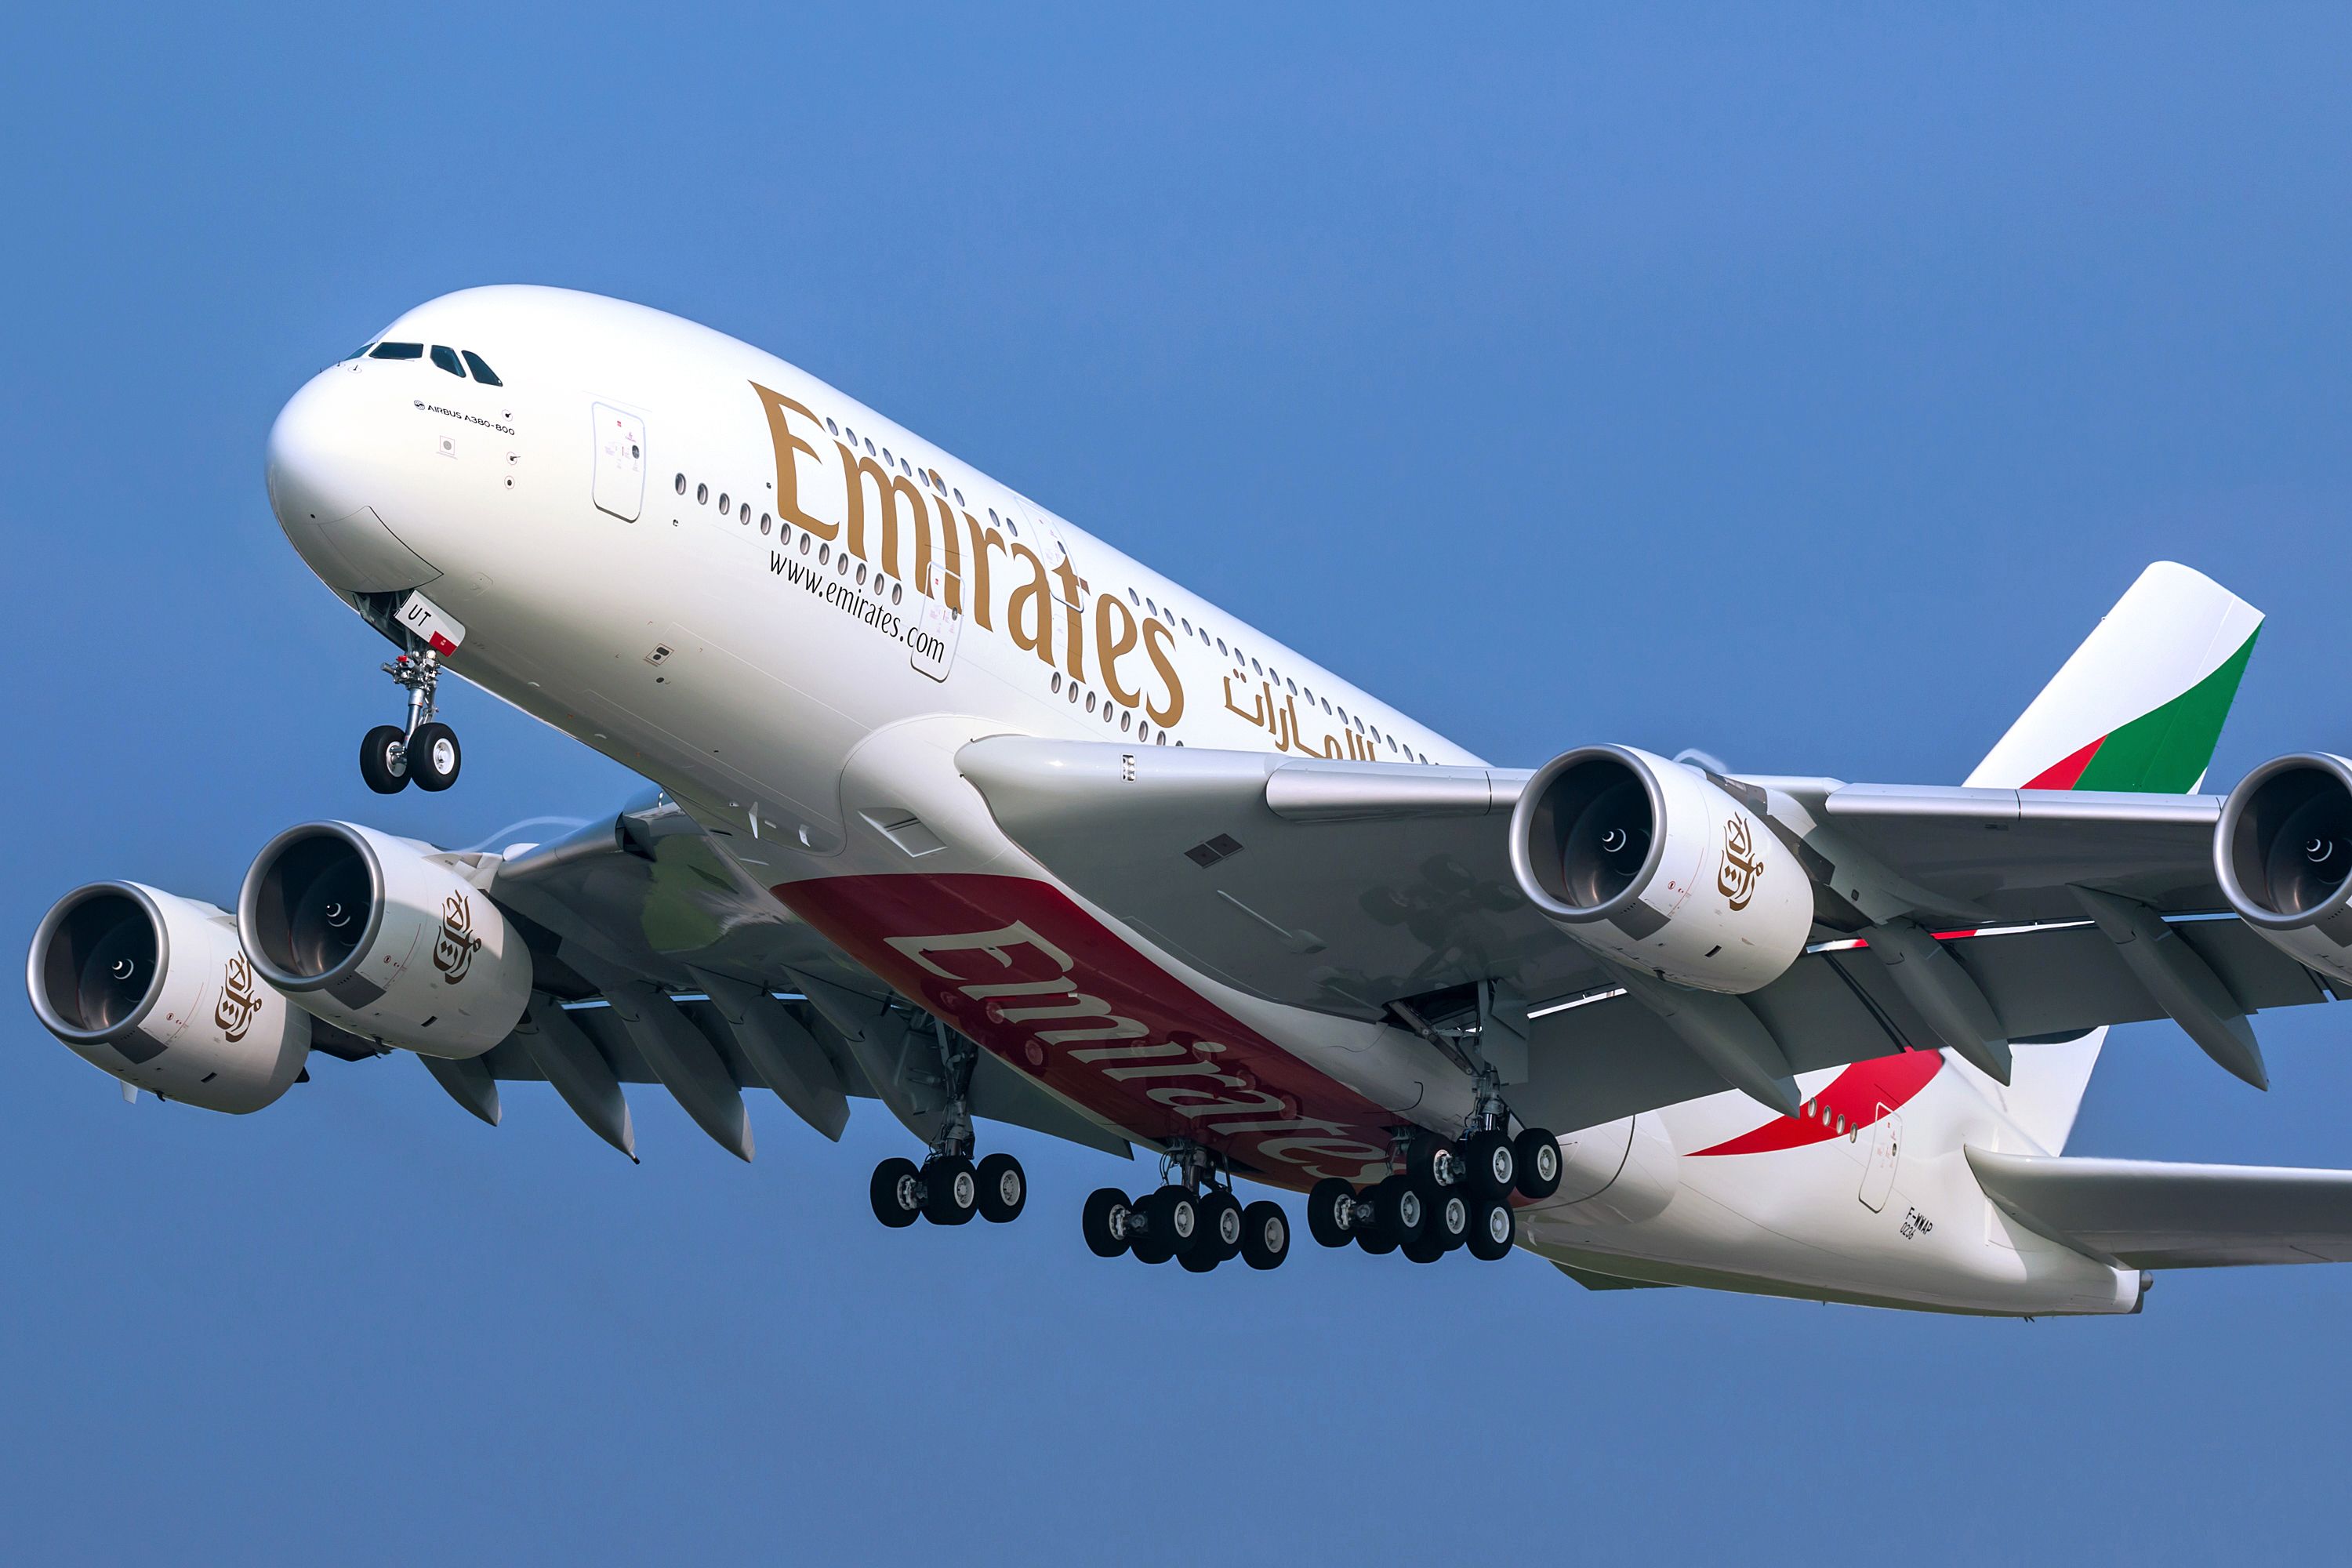 Emirates Airbus A380 flying in the sky.